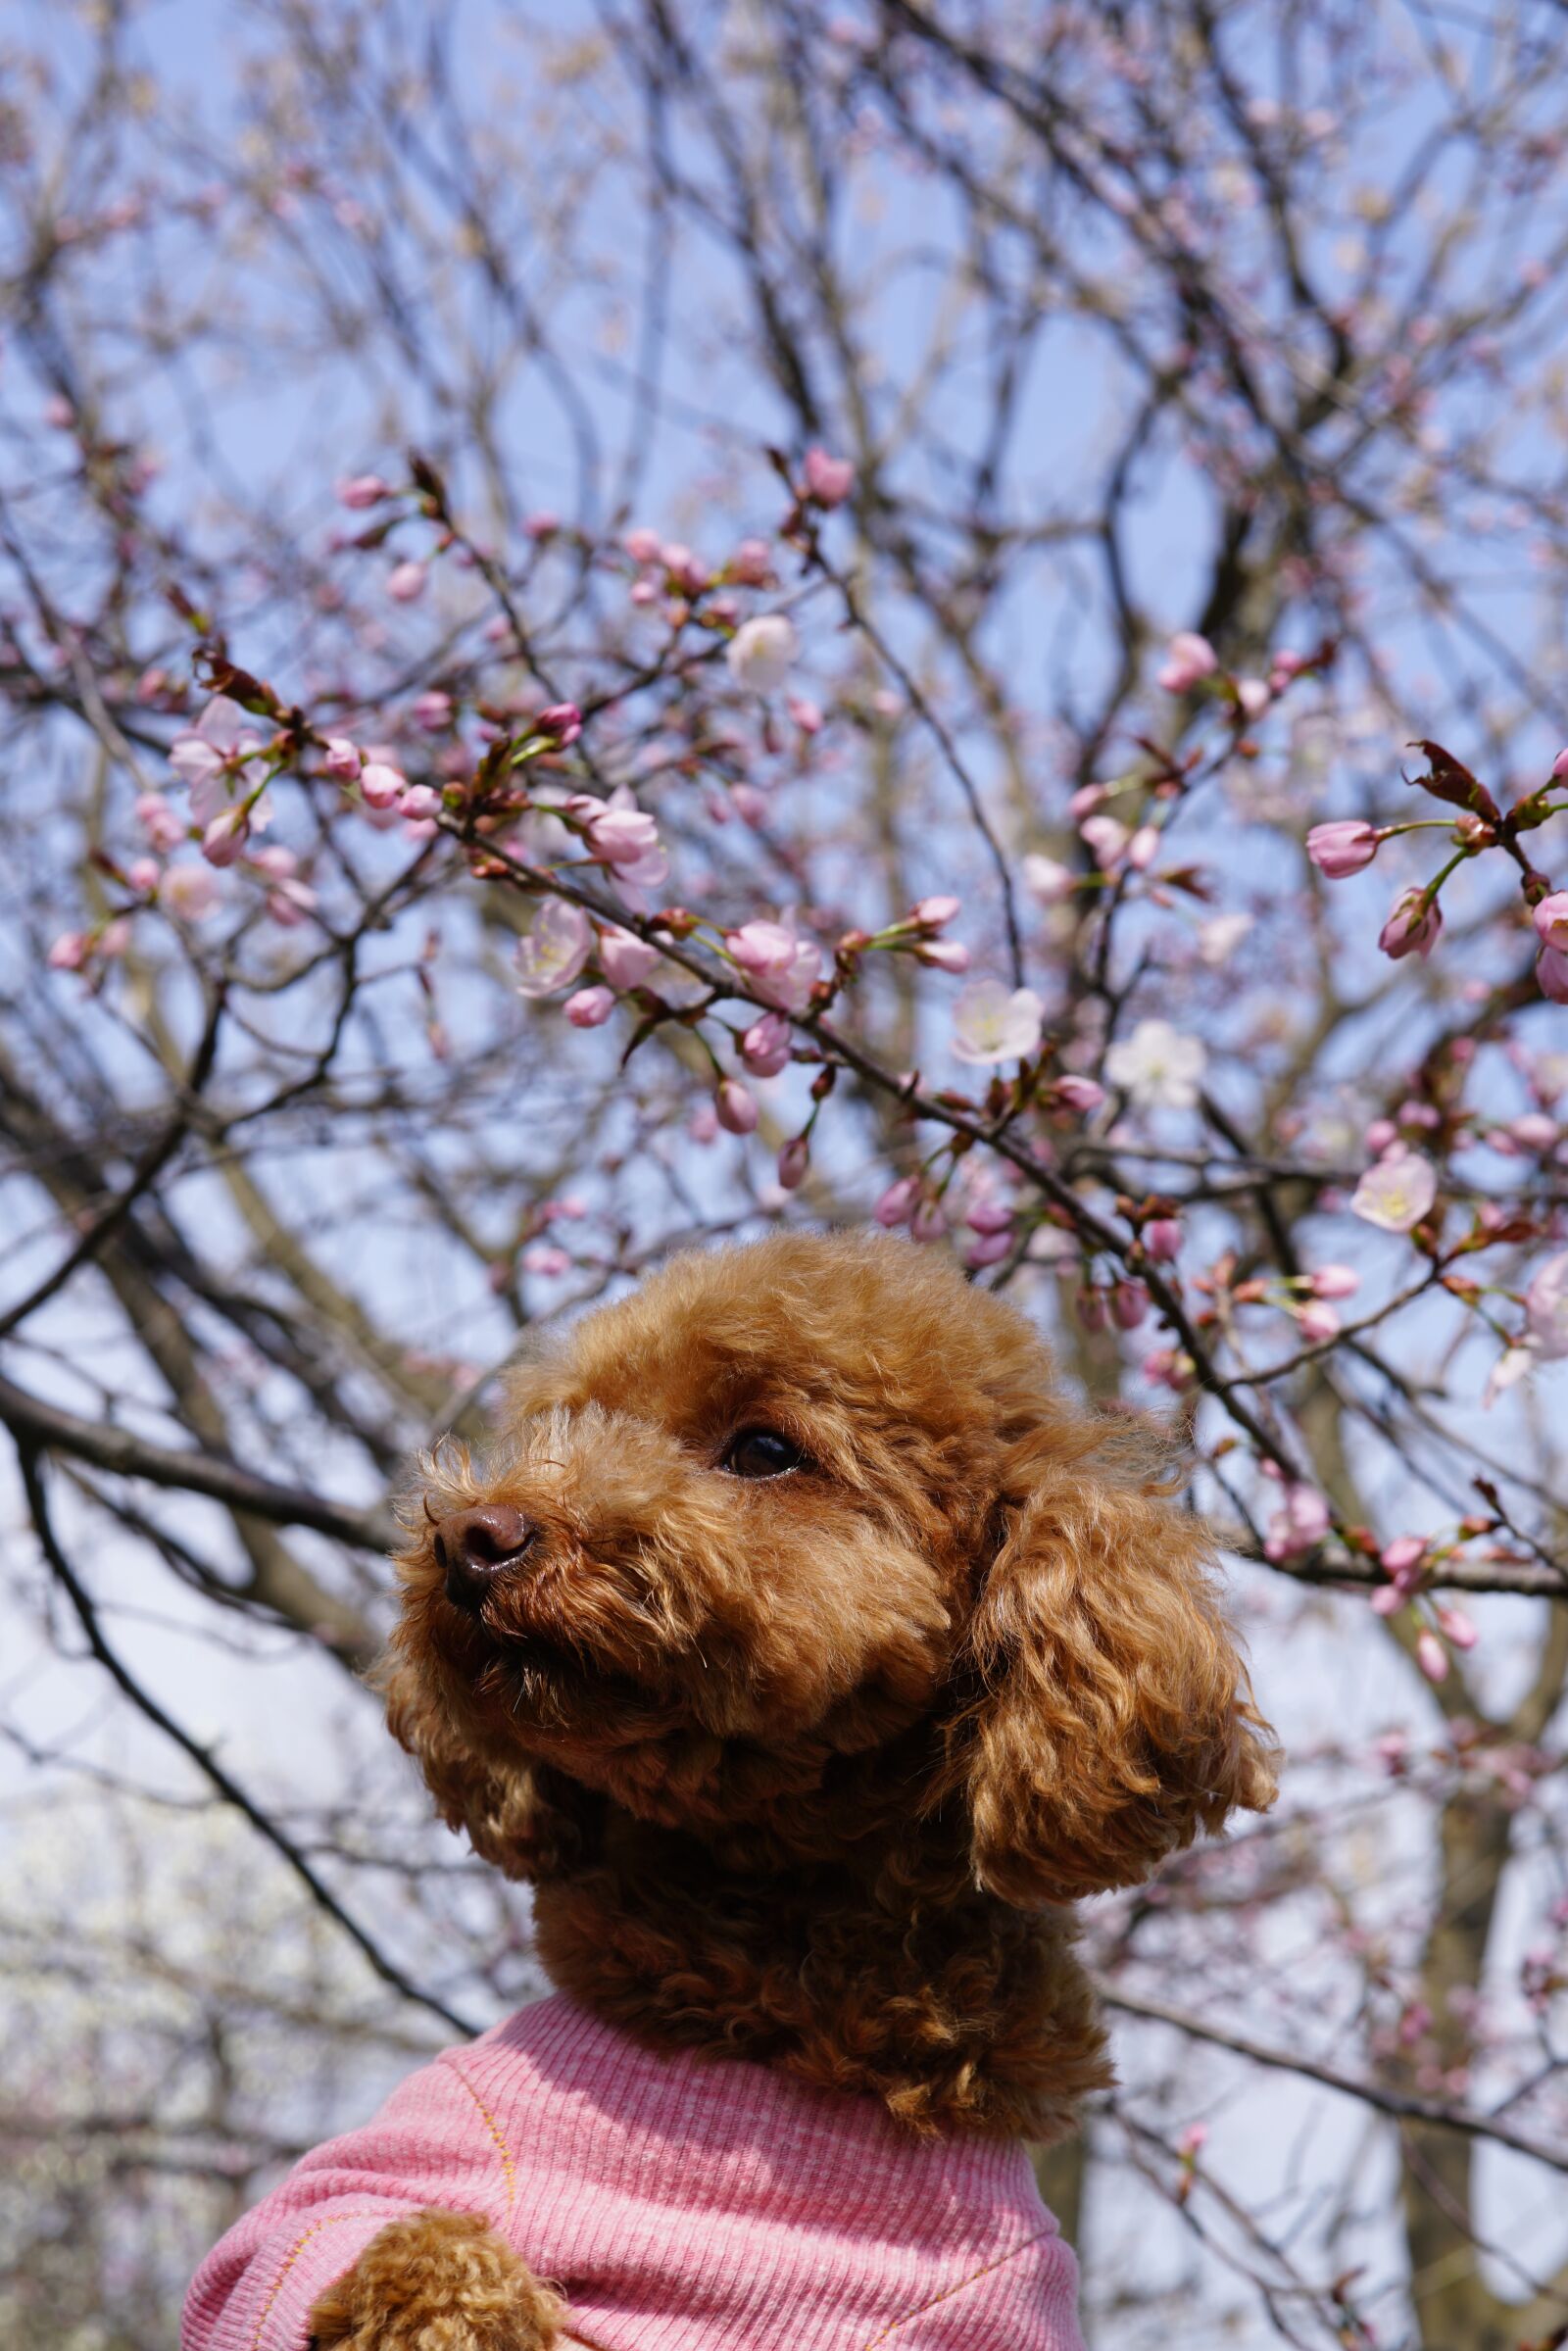 Sony a99 II sample photo. Dog, cherry blossoms, toy photography